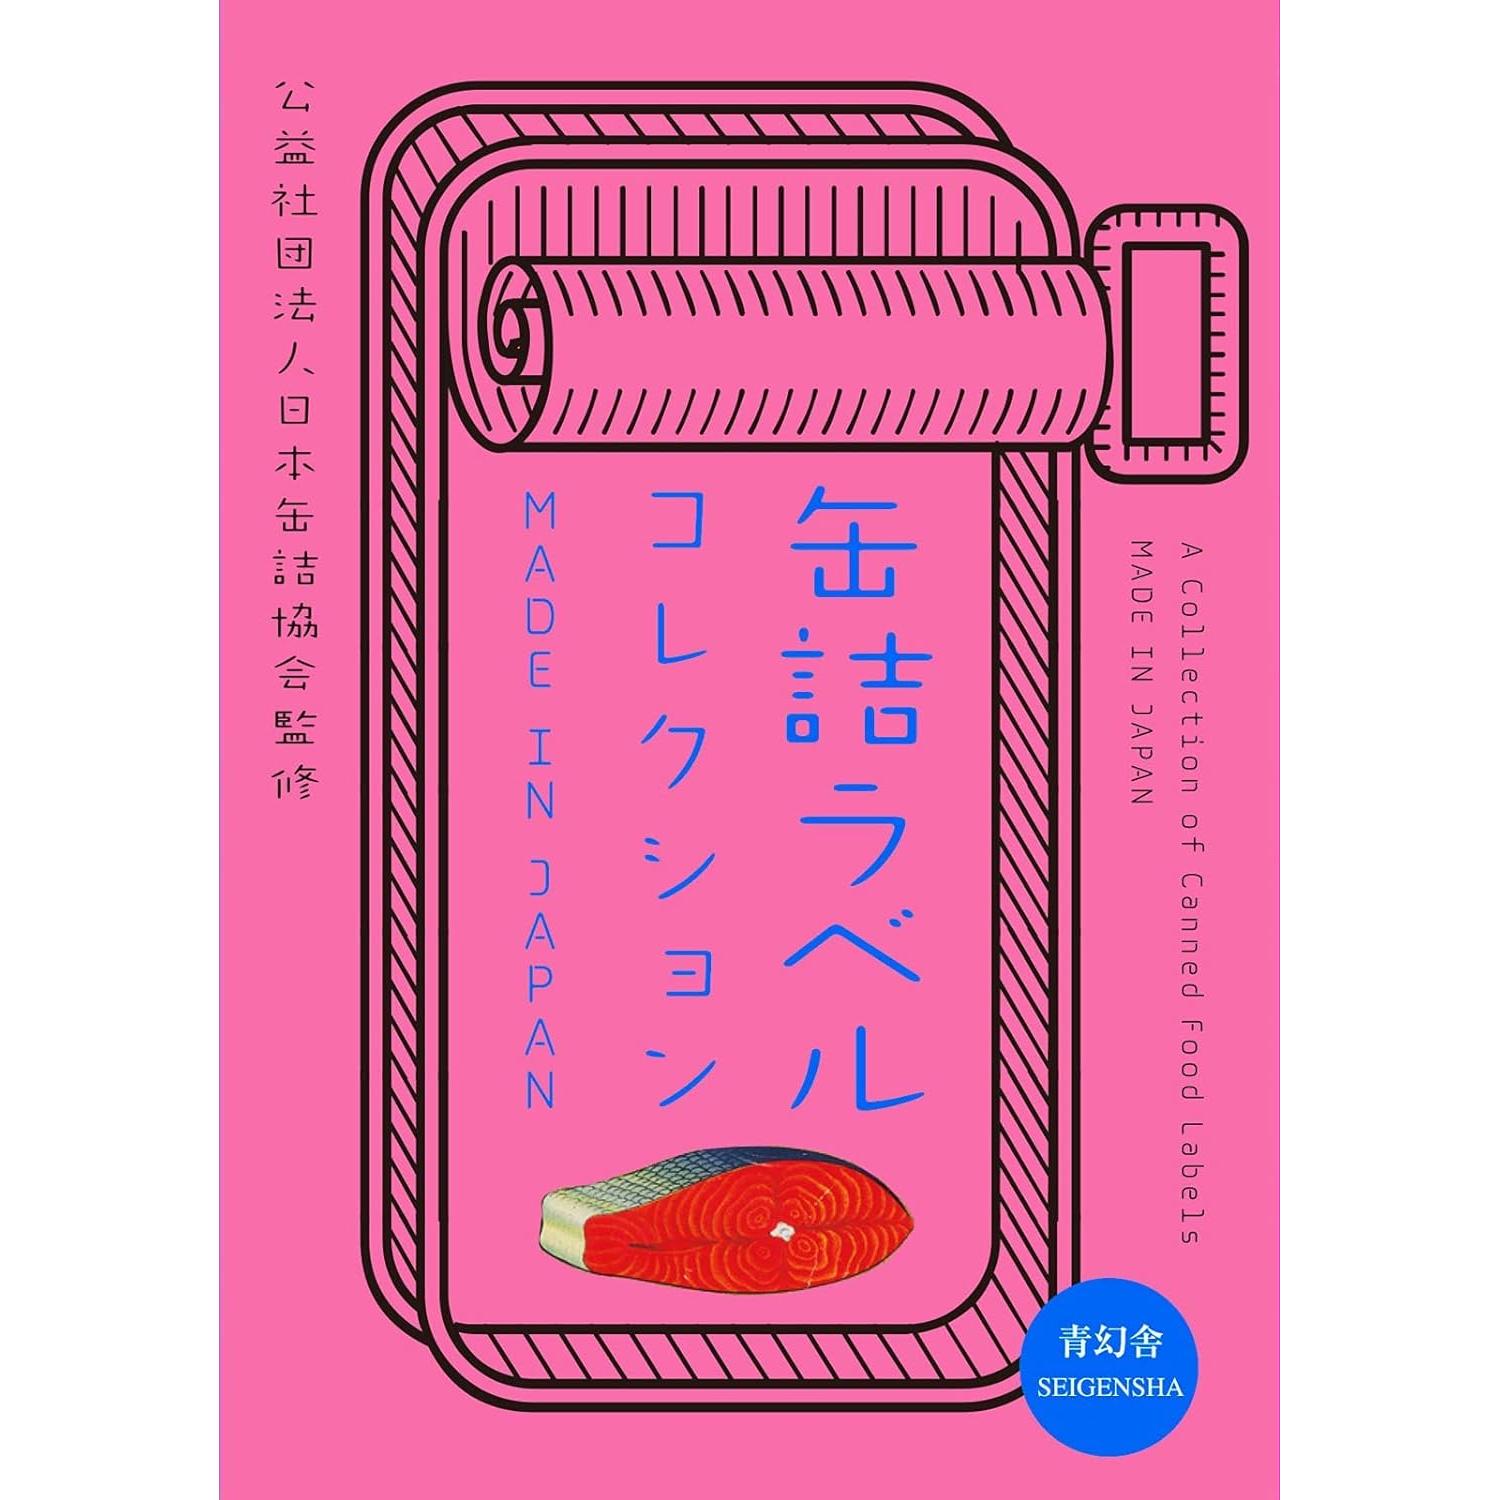 A collection of Canned Food Labels MADE IN JAPAN